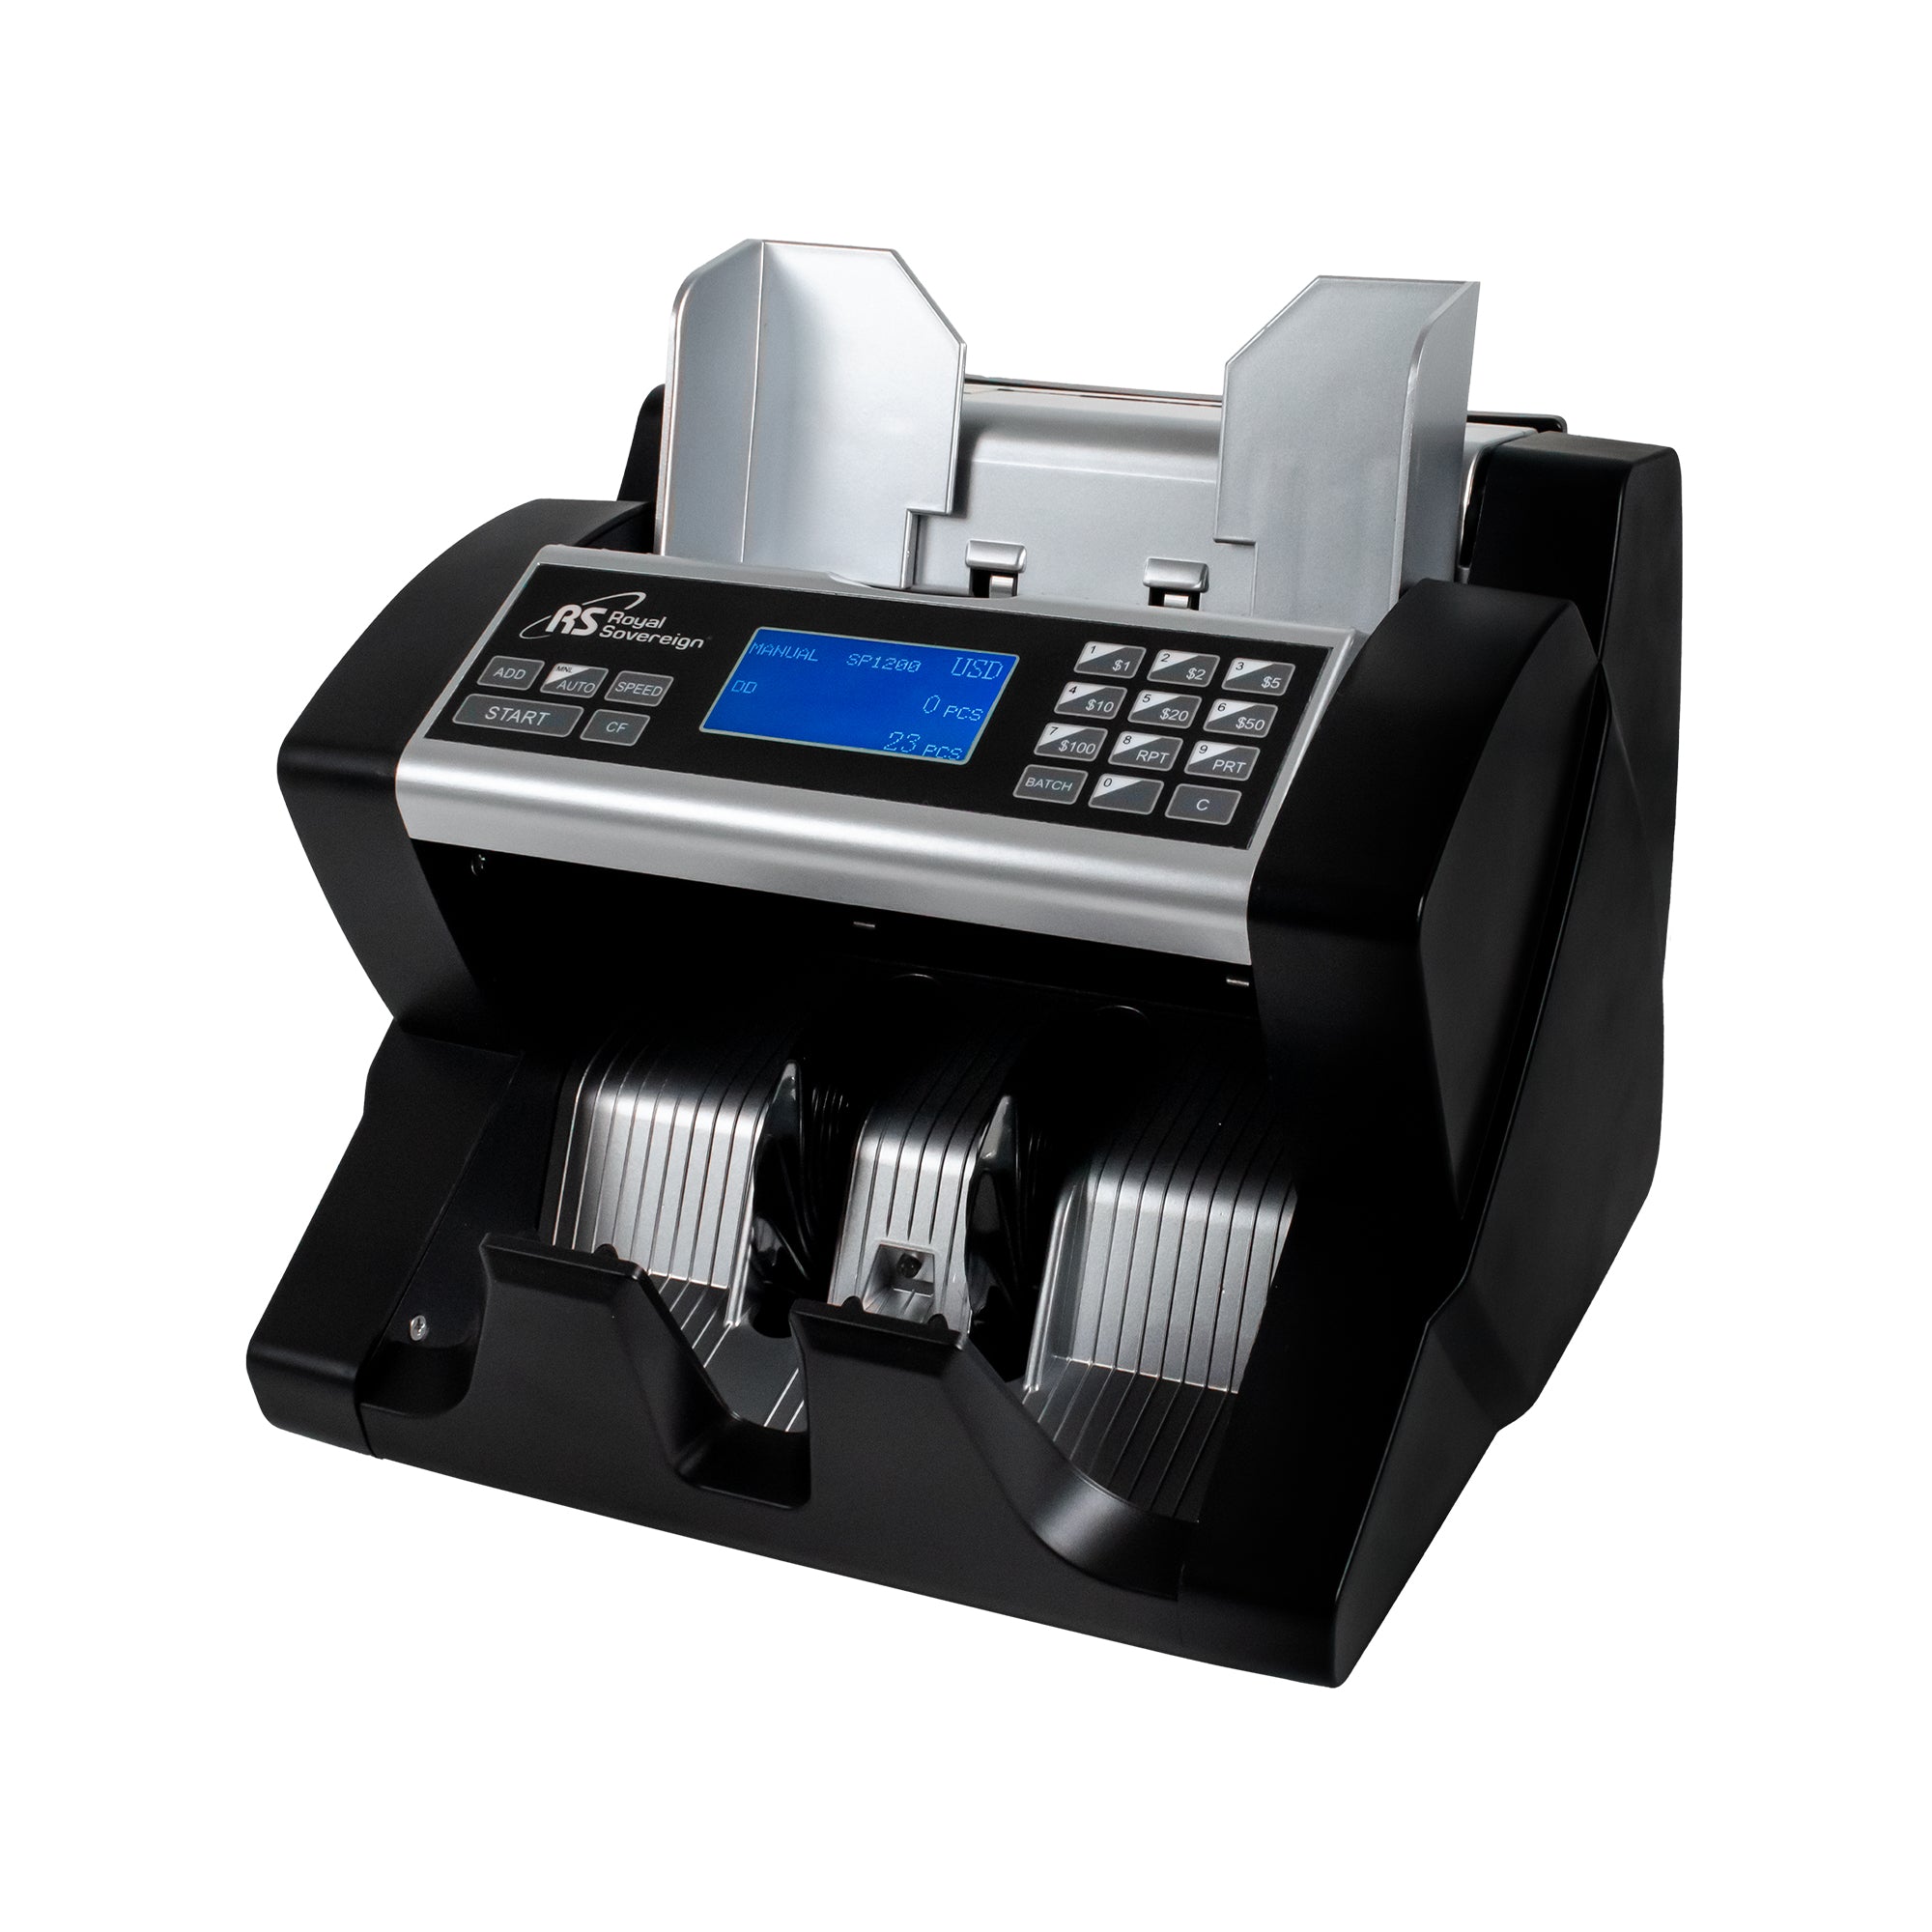 RBC-ED350, Bill Counter with Value Detection, Counterfeit Identification